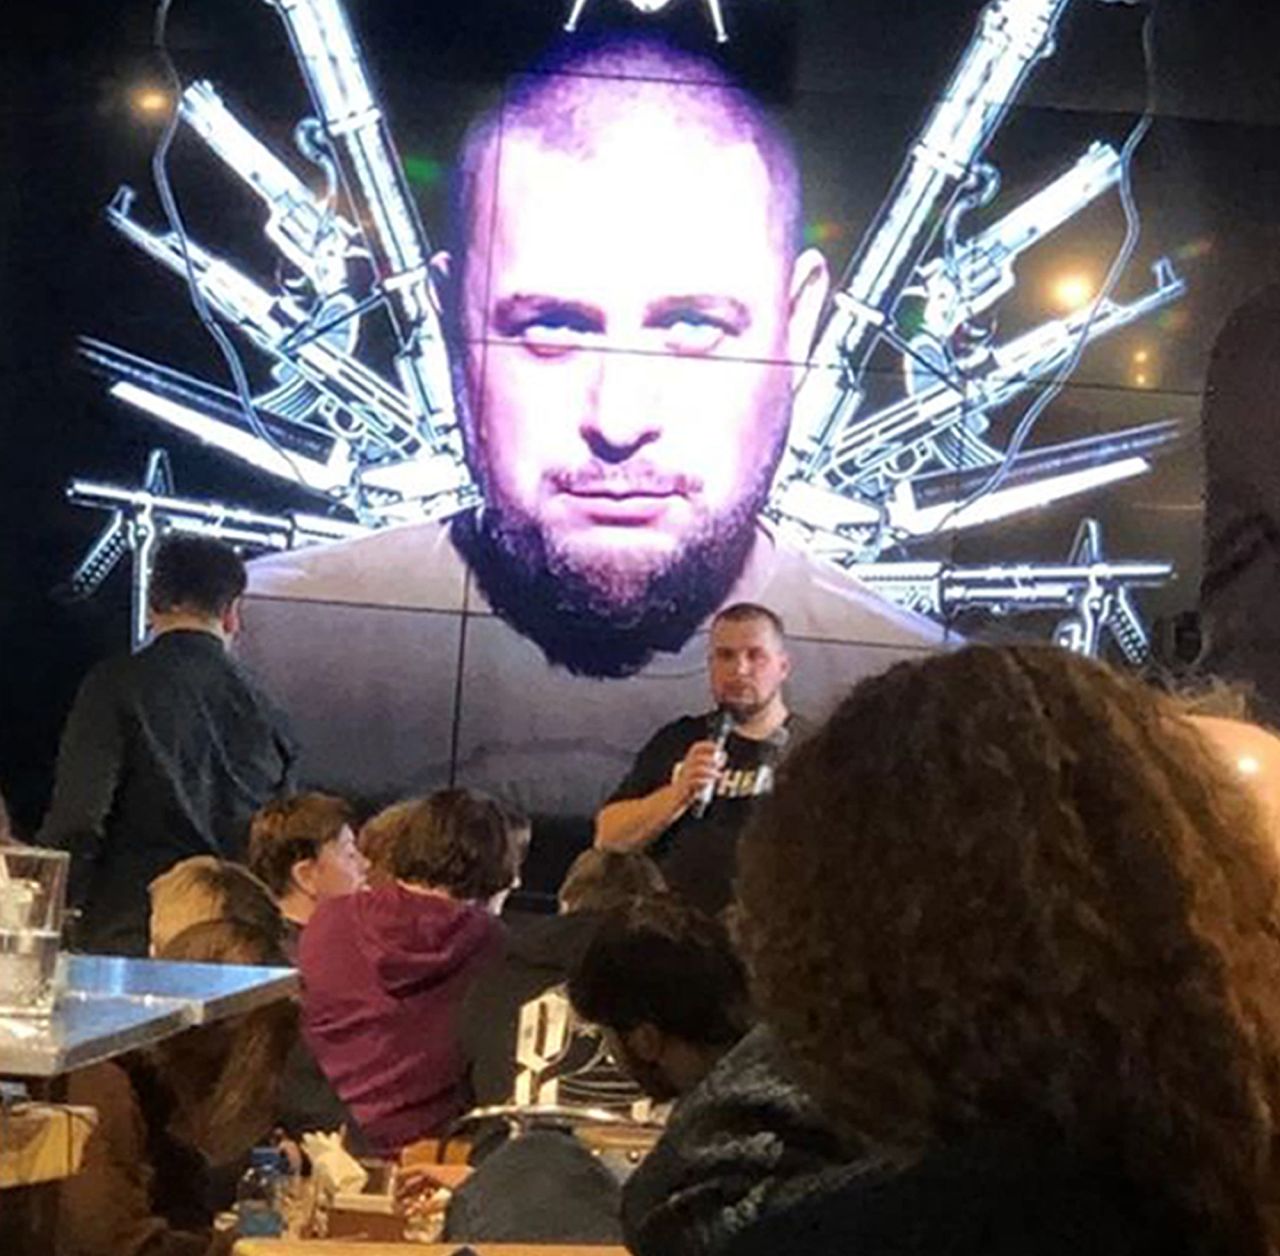 Russian blogger Vladlen Tatarsky speaks during a party in front of projection of an image of him, before an explosion at a cafe in St. Petersburg, Russia, on April 2.